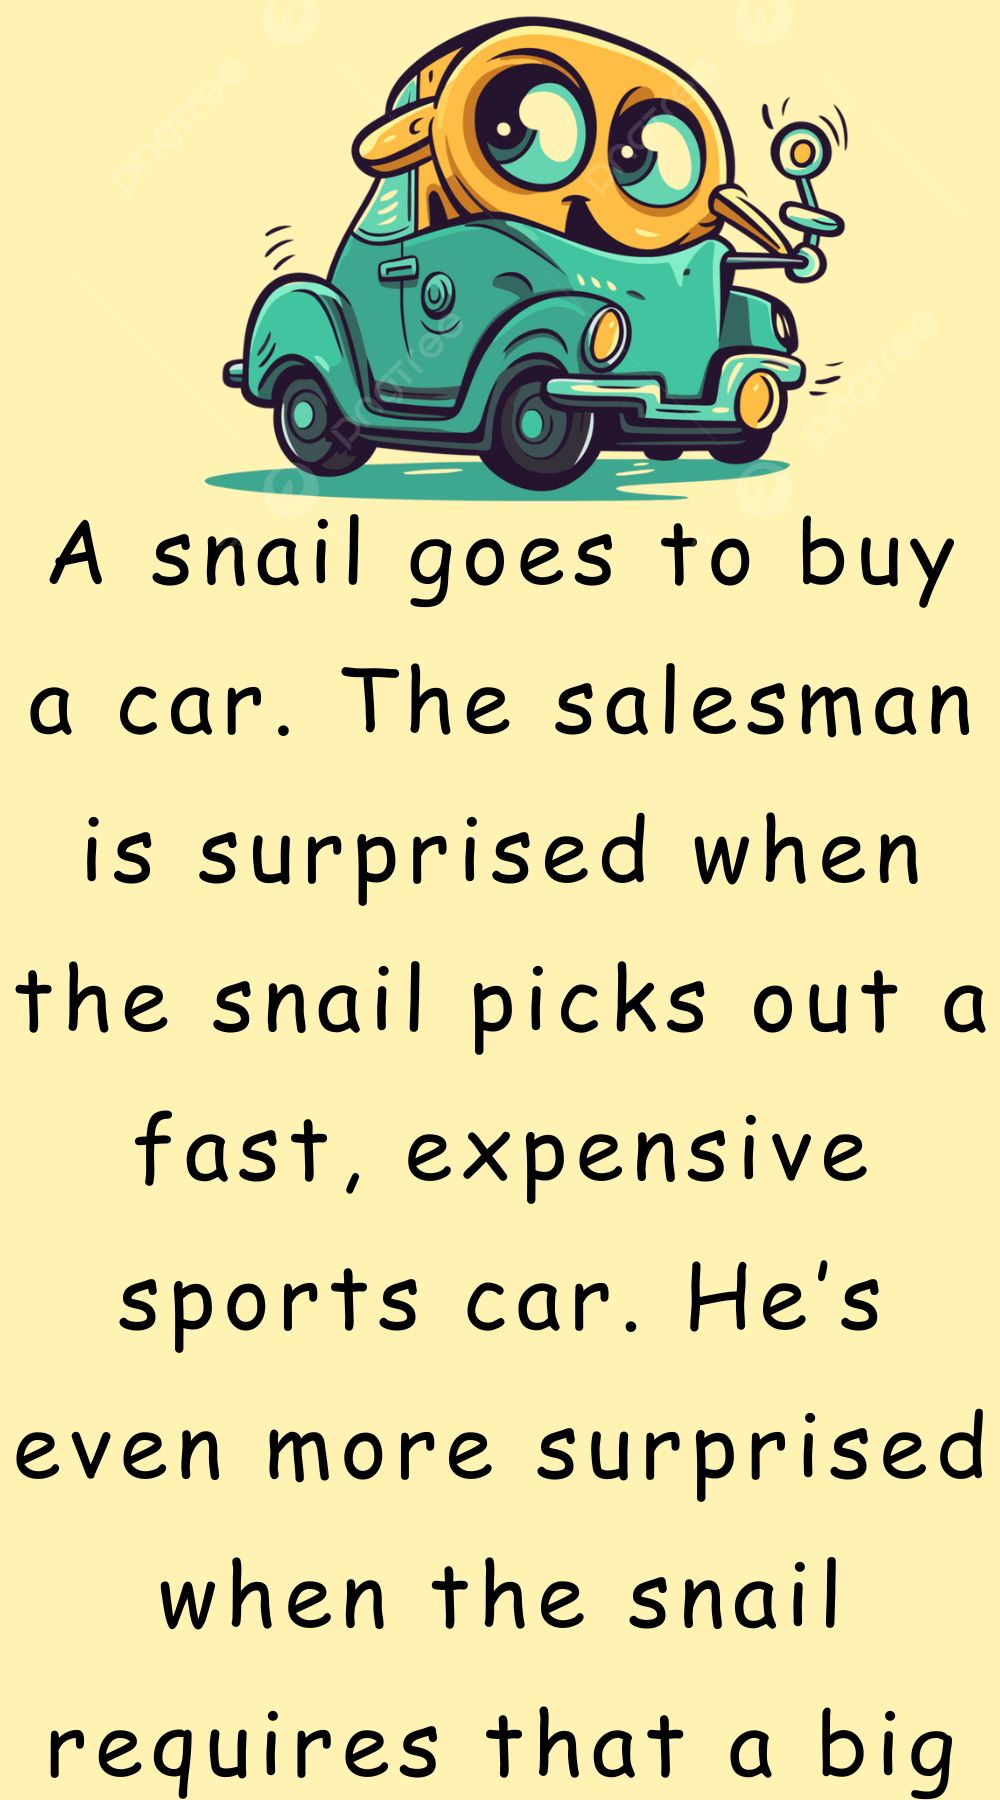 A snail goes to buy a car